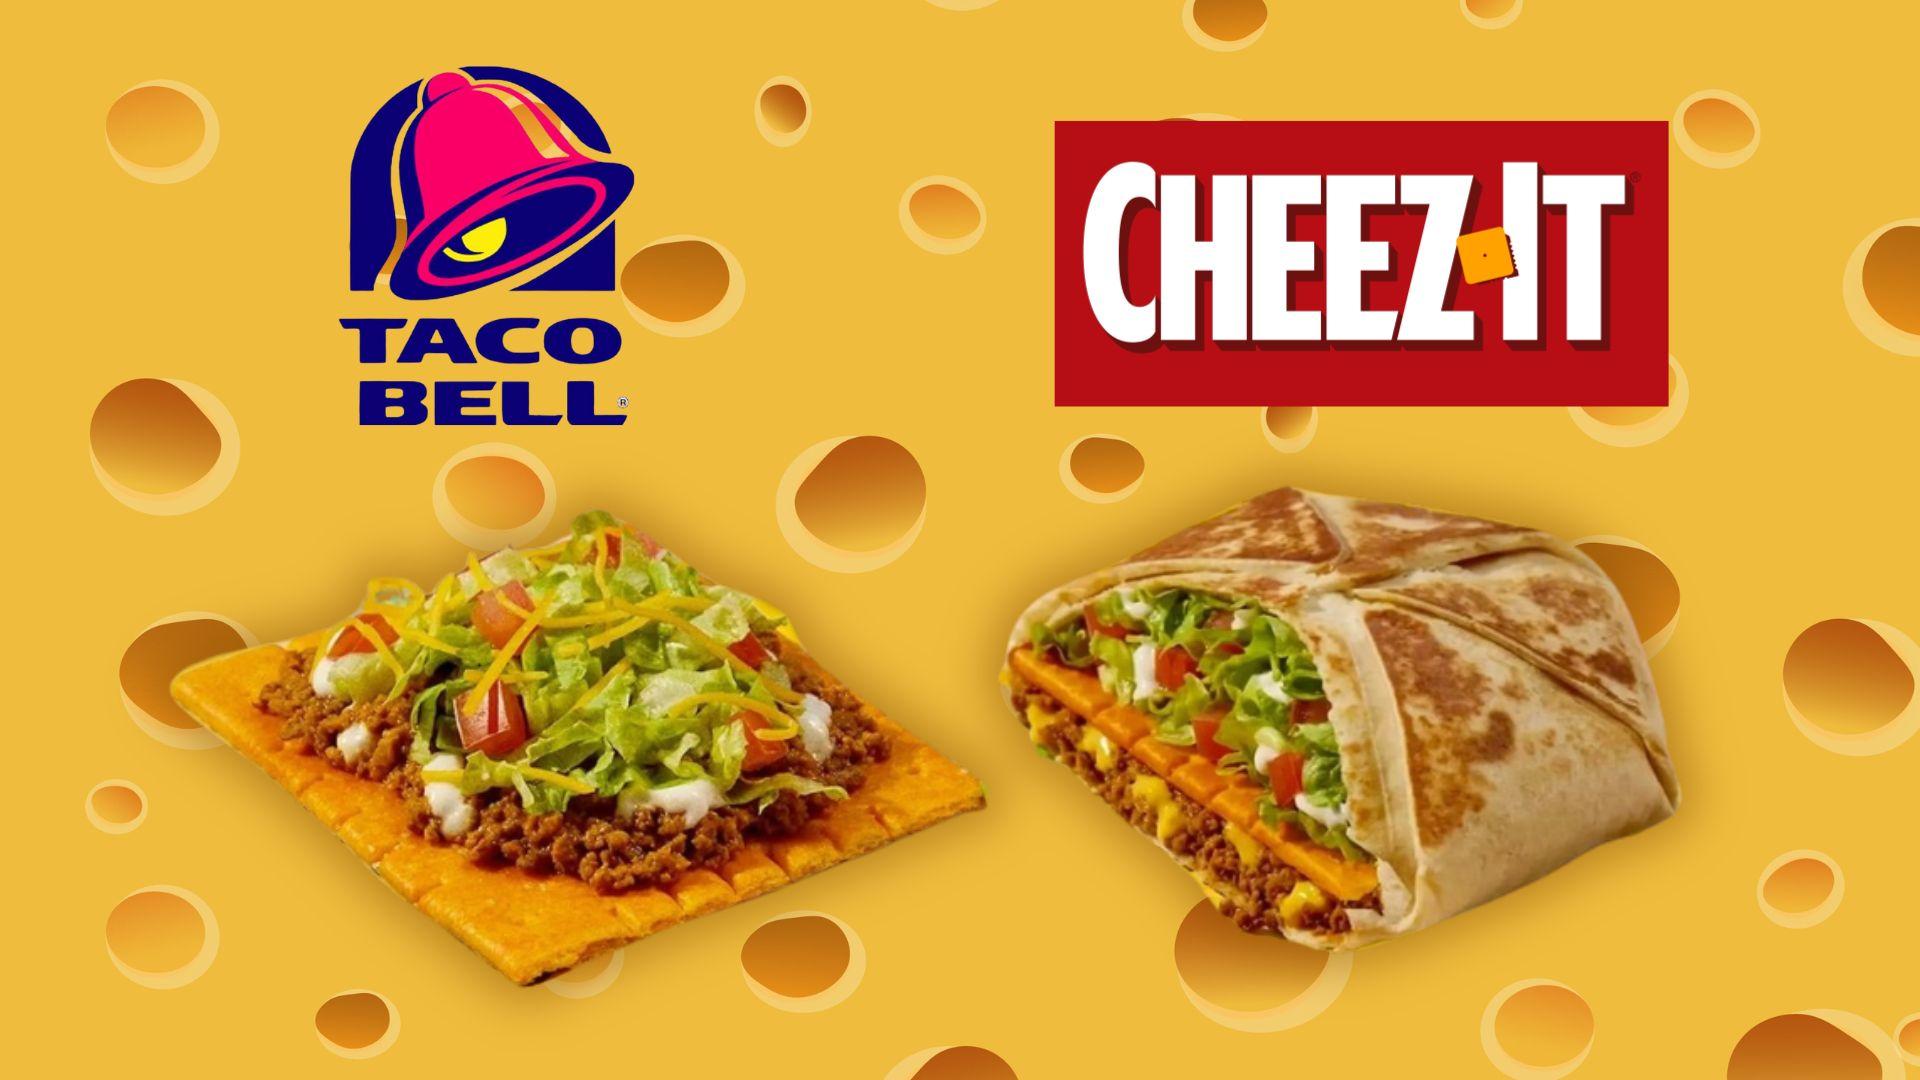 Taco Bell x Cheez-It collab